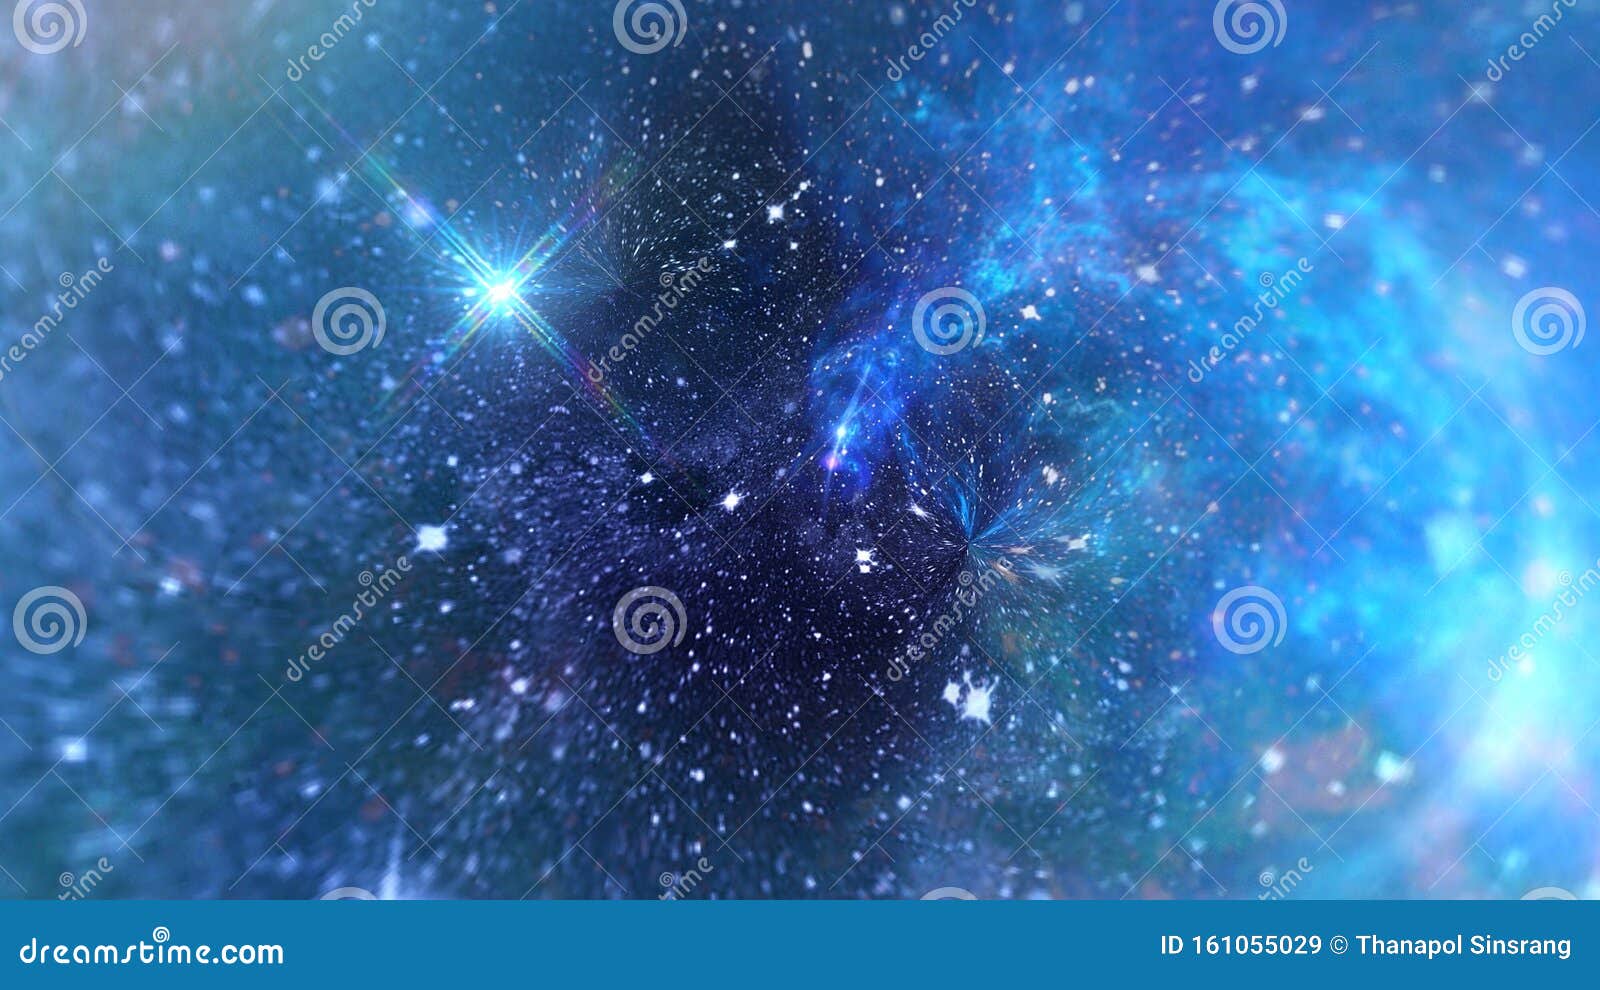 https://thumbs.dreamstime.com/z/planets-galaxy-science-fiction-wallpaper-astronomy-scientific-study-universe-stars-planets-galaxies-eve-161055029.jpg